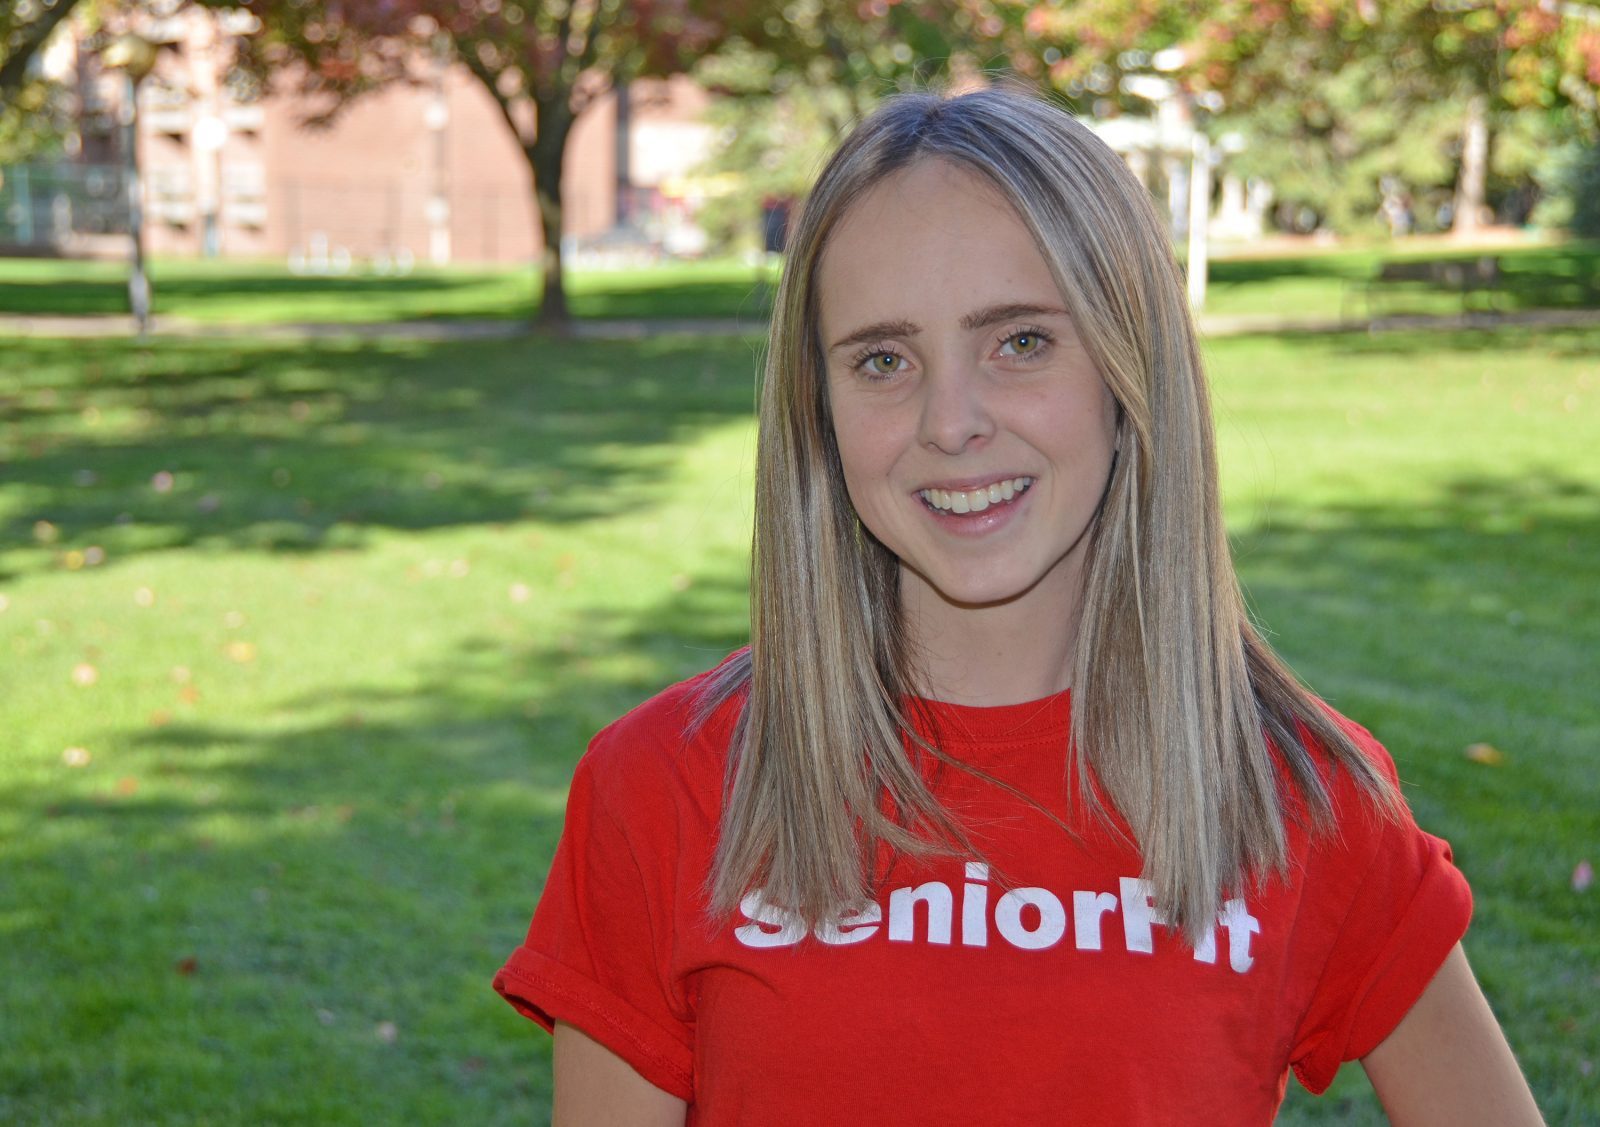 A young, smiling woman with long blond hair wearing a red T-shirt that says “SeniorFit” smiles into the camera, with blurred trees and a building in the background.